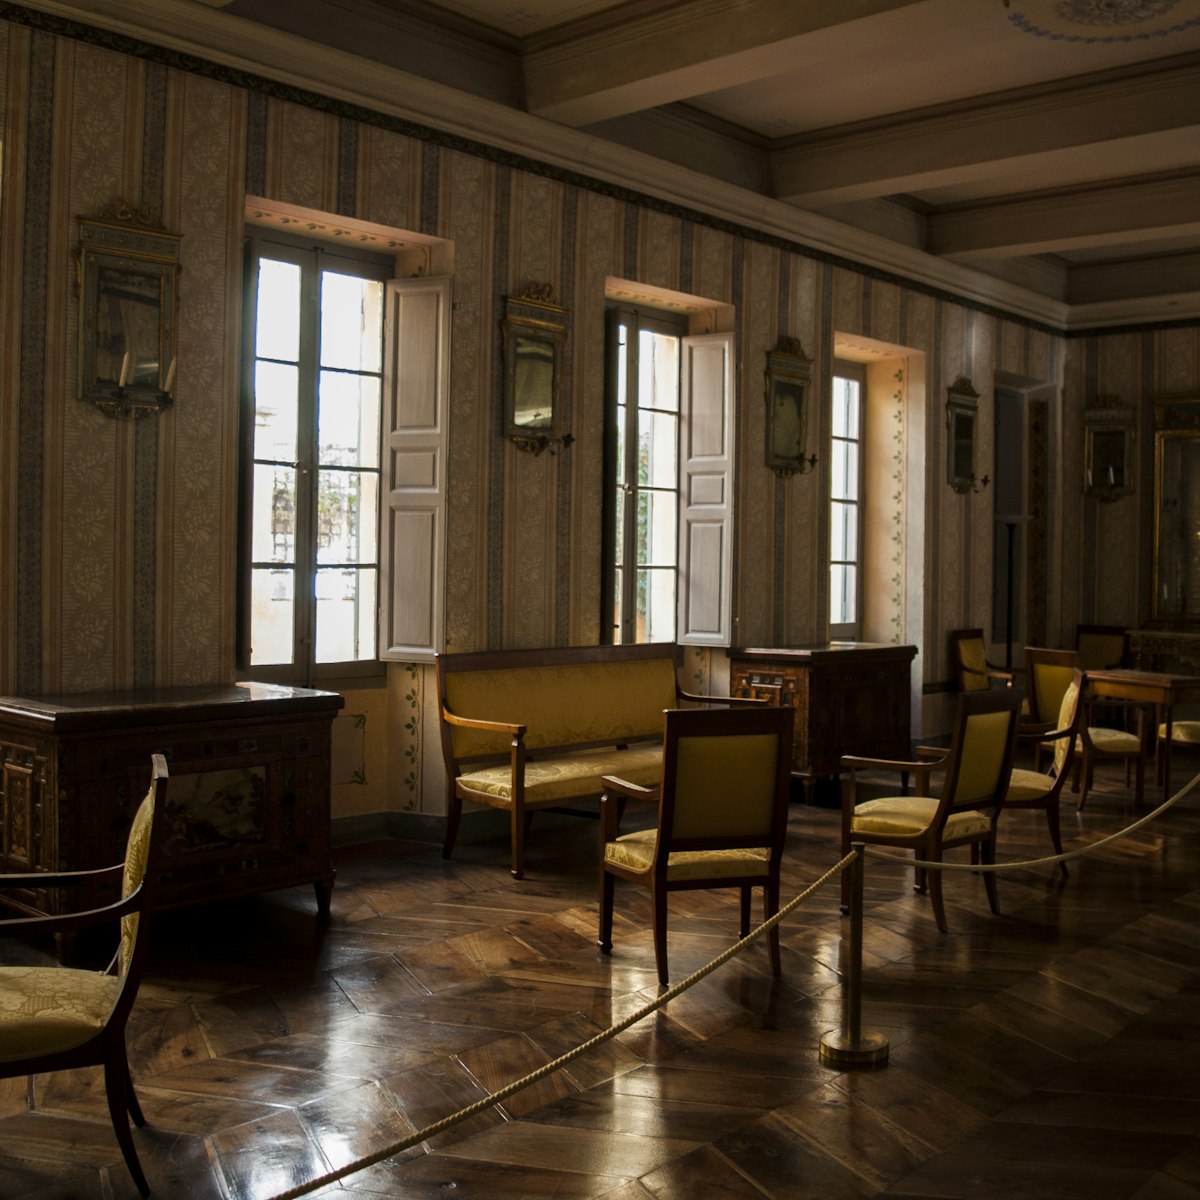 The Galerie, a great room for the guests, in the Maison Bonaparte in Ajaccio, ancestral home of the Bonaparte family and the birthplace of Napoleon.